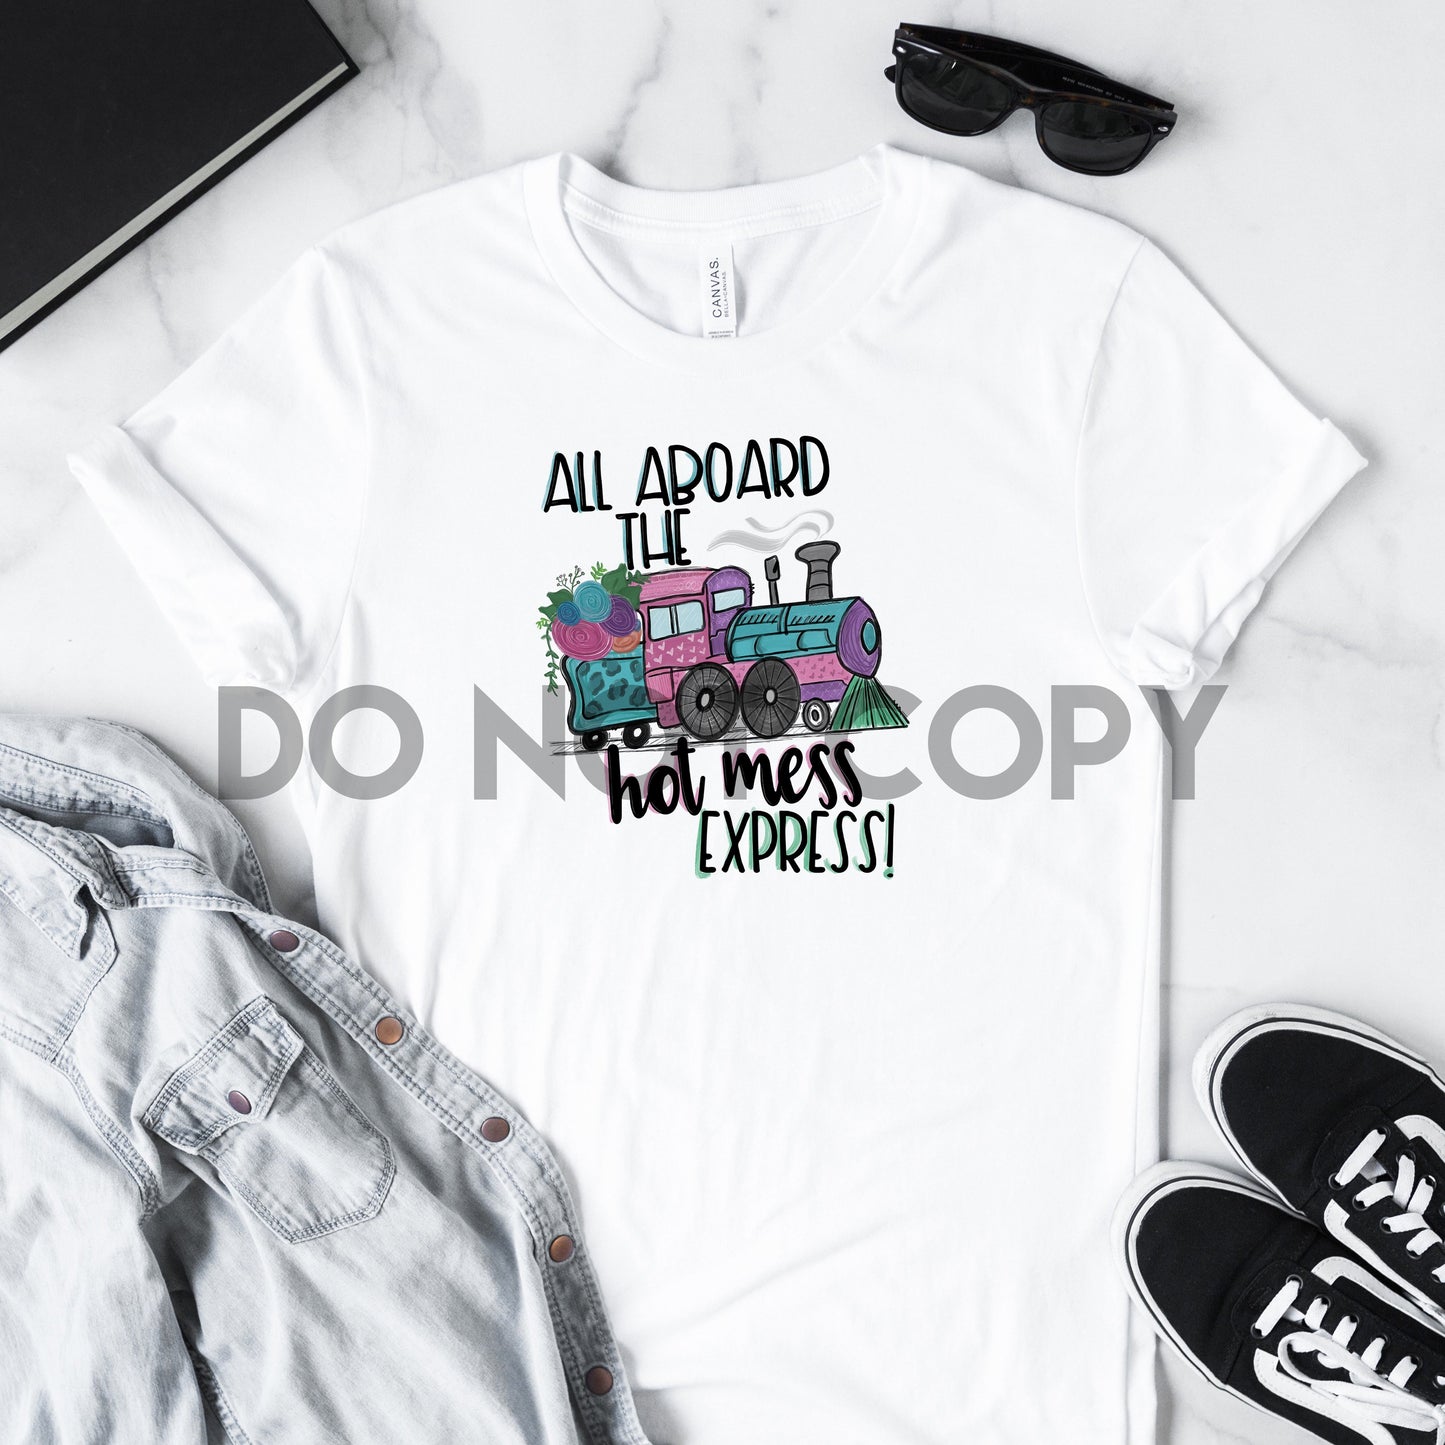 All Aboard The Hot Mess Express Dream Print or Sublimation Print